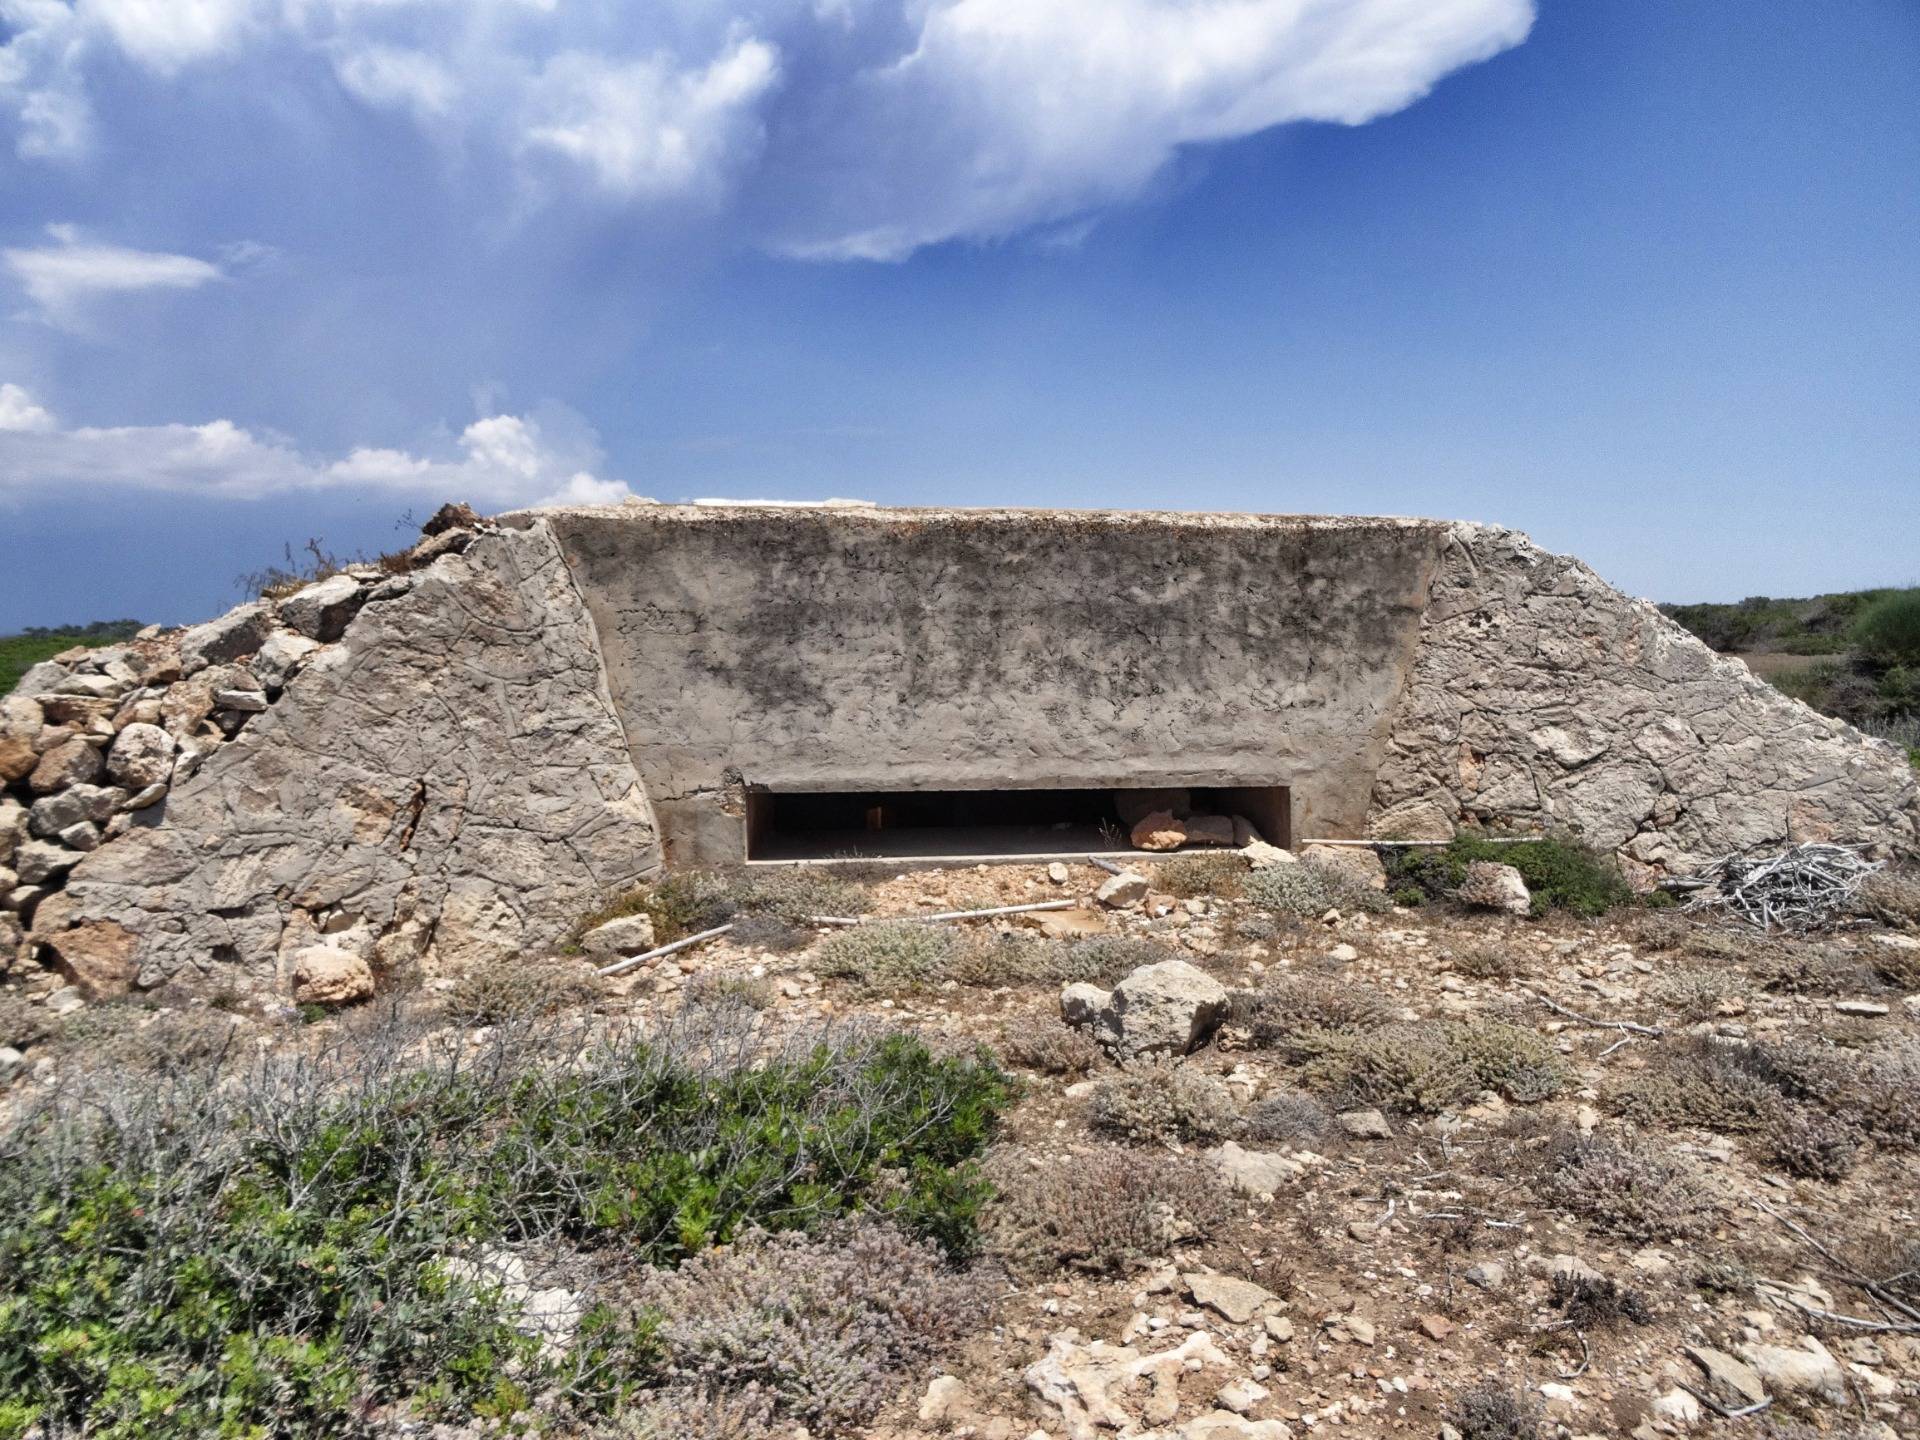 Hoxha feared an invasion, so he build shelters everywhere